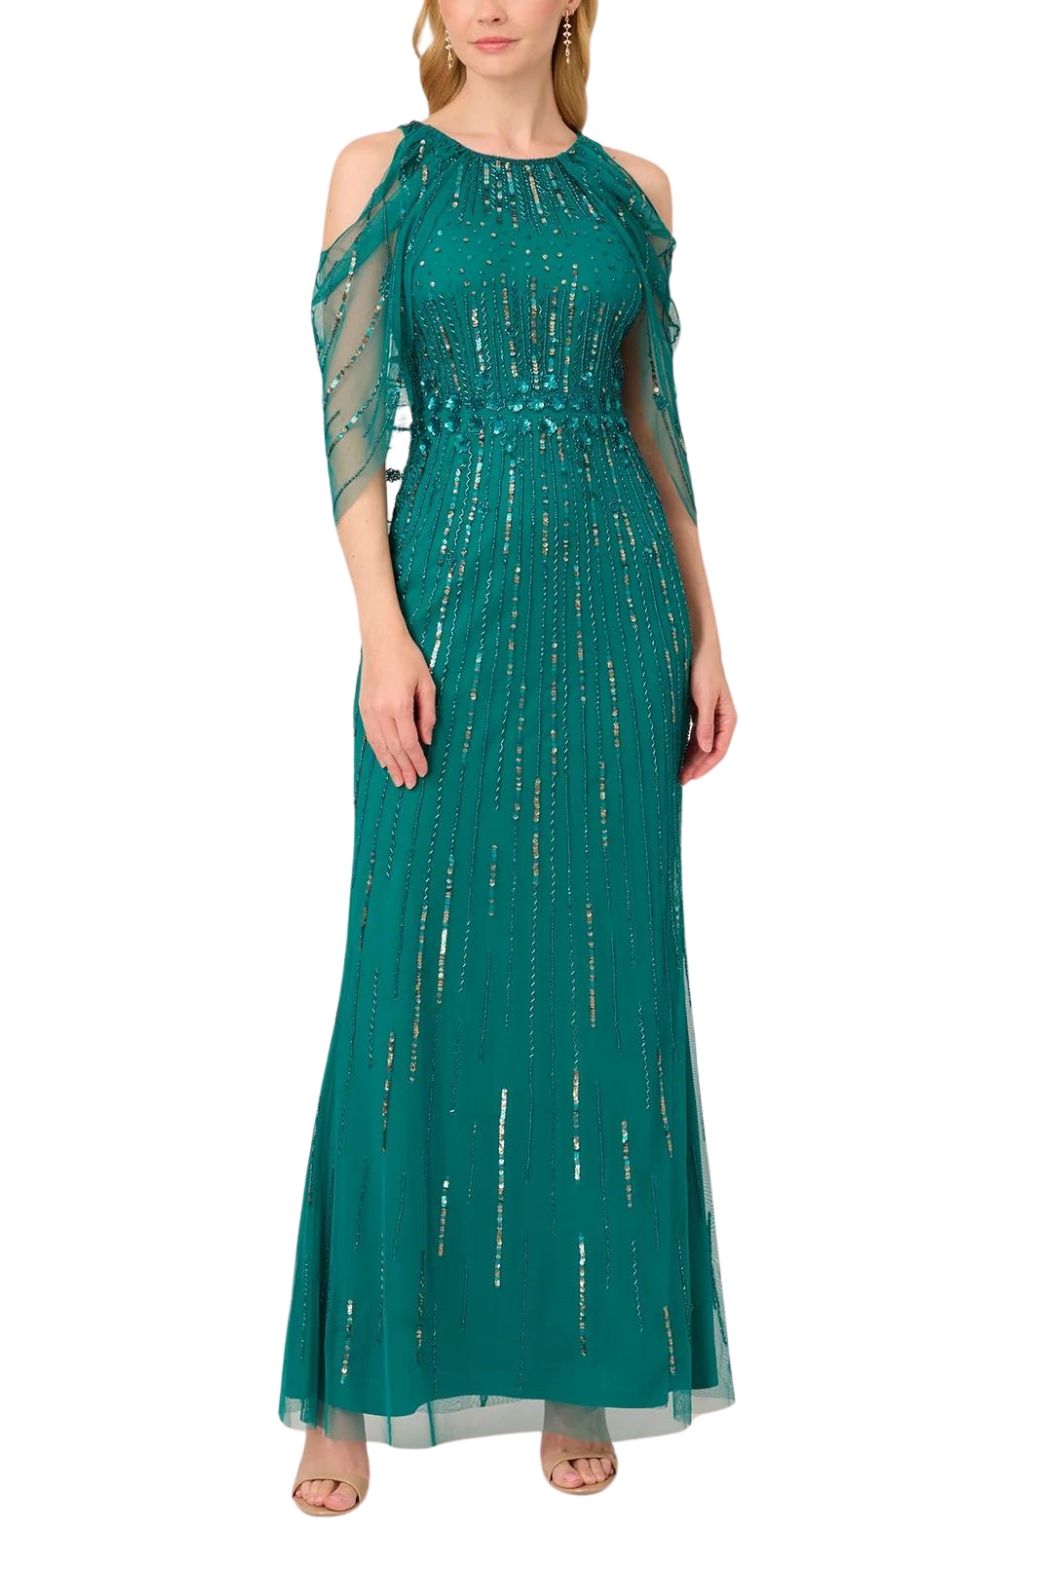 Adrianna Papell Cold Shoulder Beaded Petite Gown